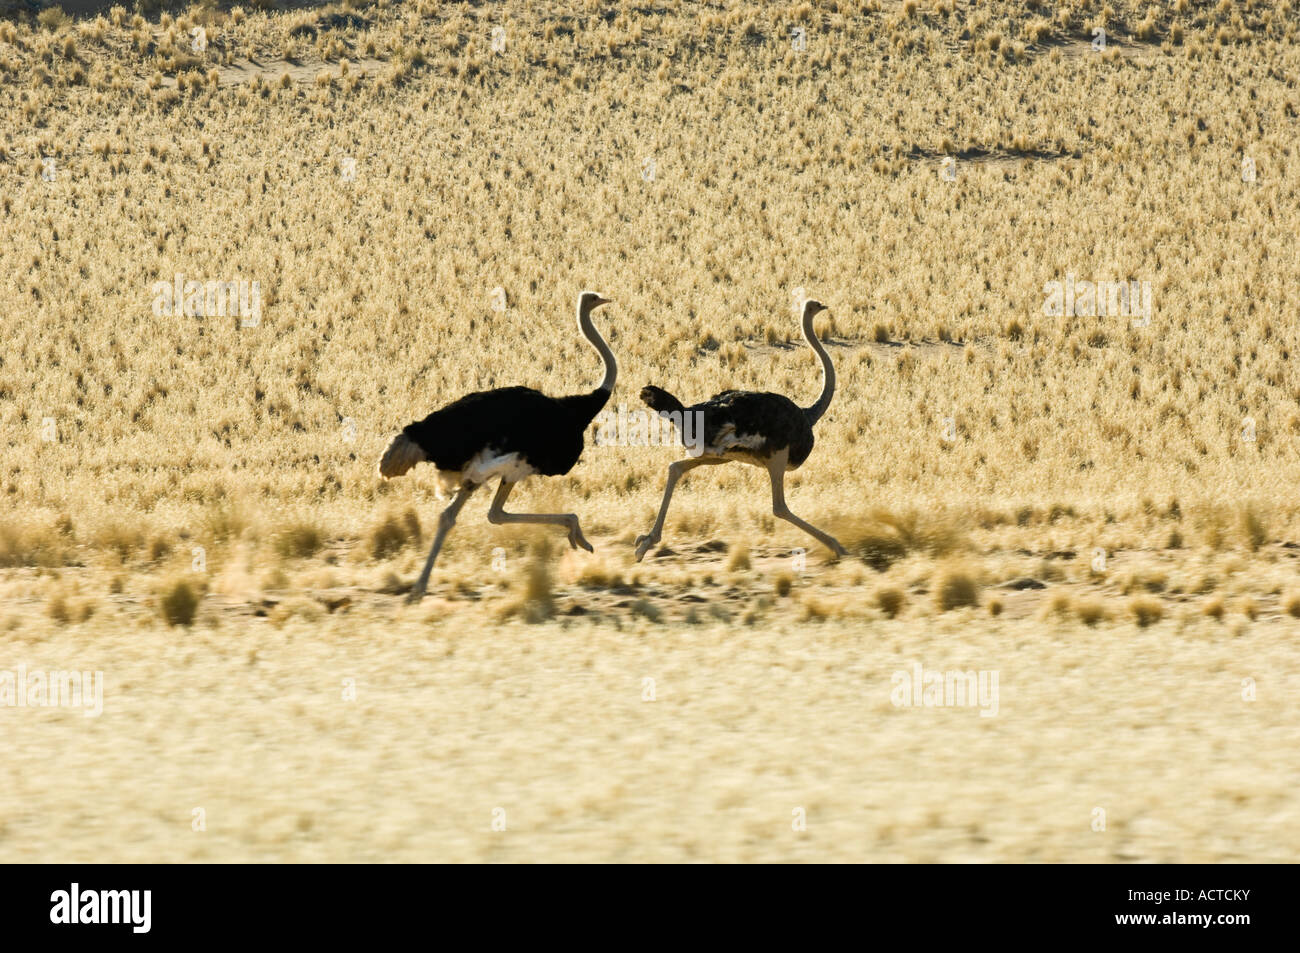 Two Ostriches running in Soussusvlei Namibia Stock Photo